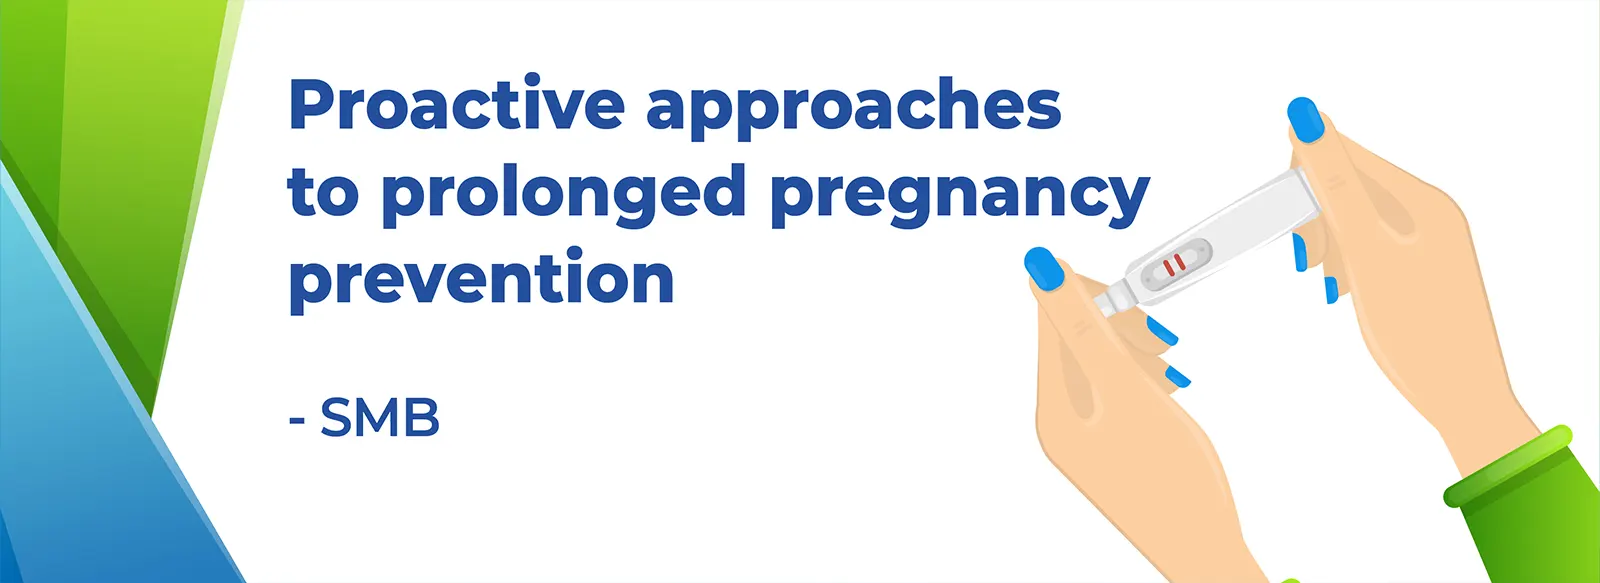 proactive approaches to prolonged pregnancy prevention